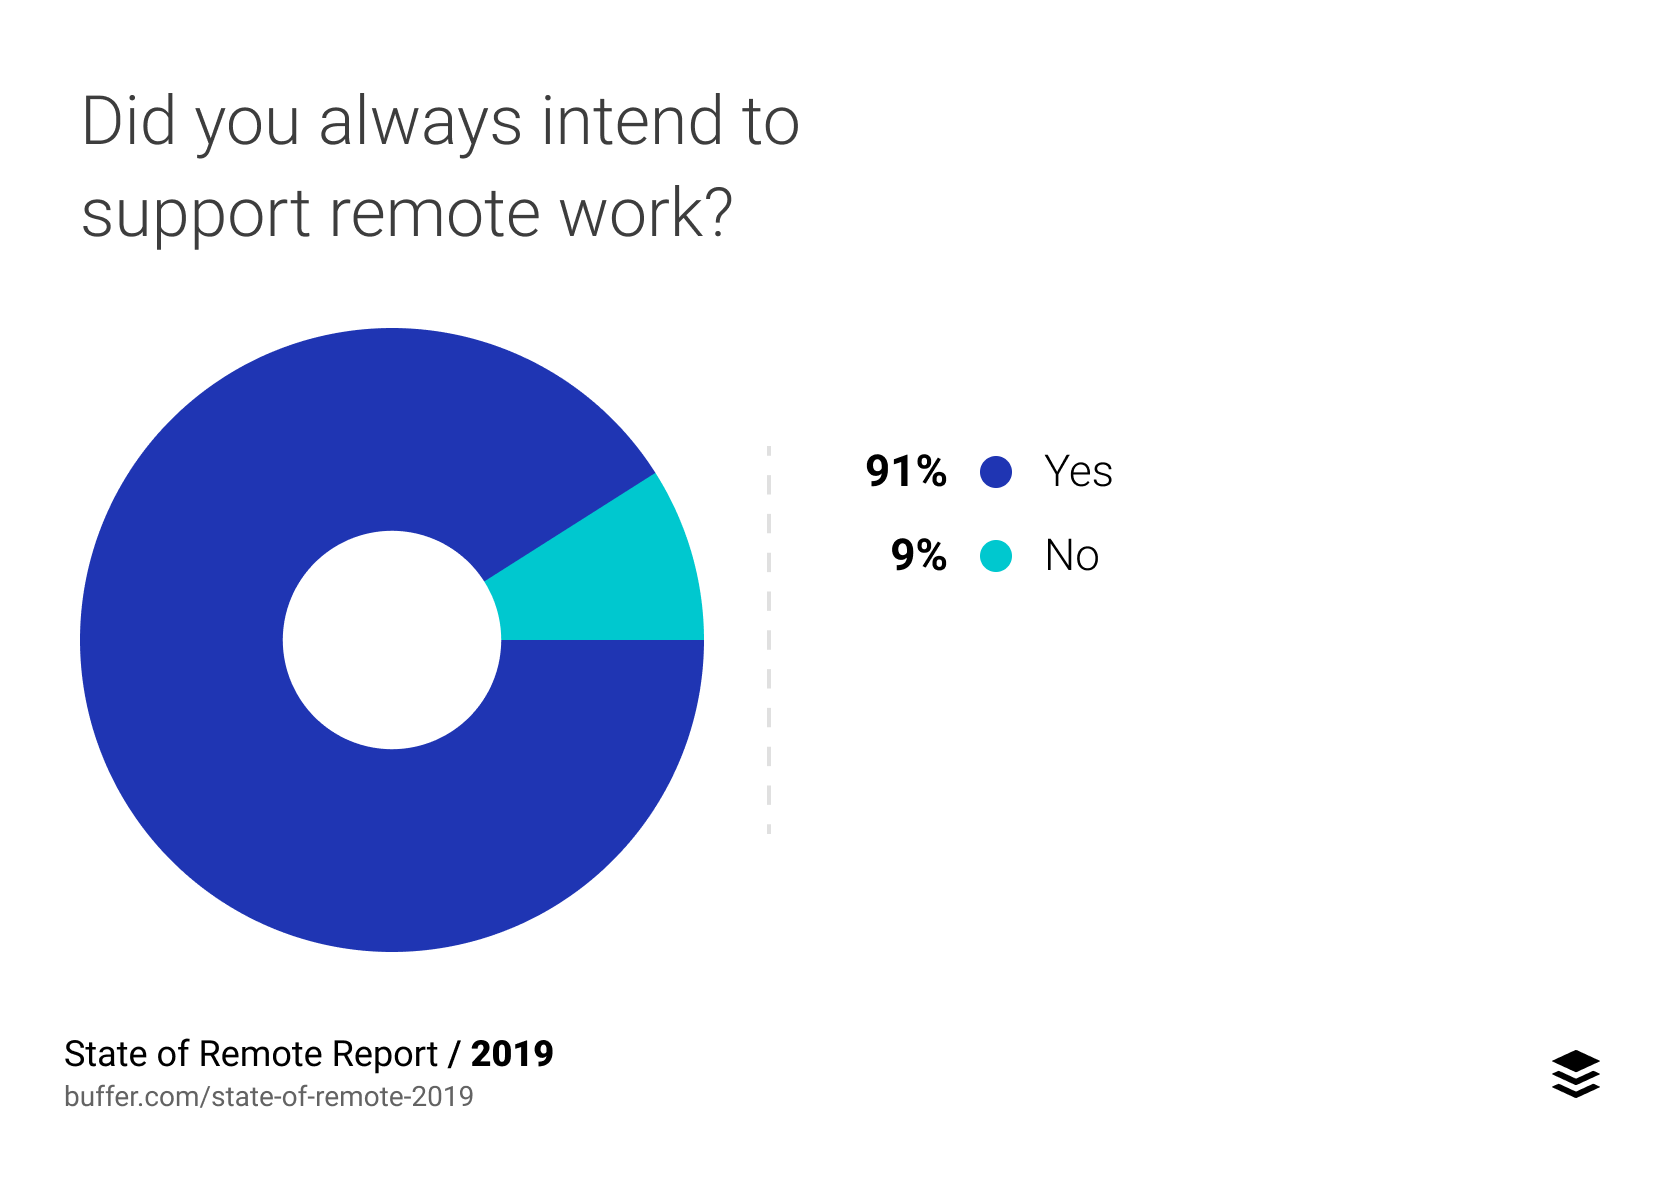 Did you always intend to support remote work?